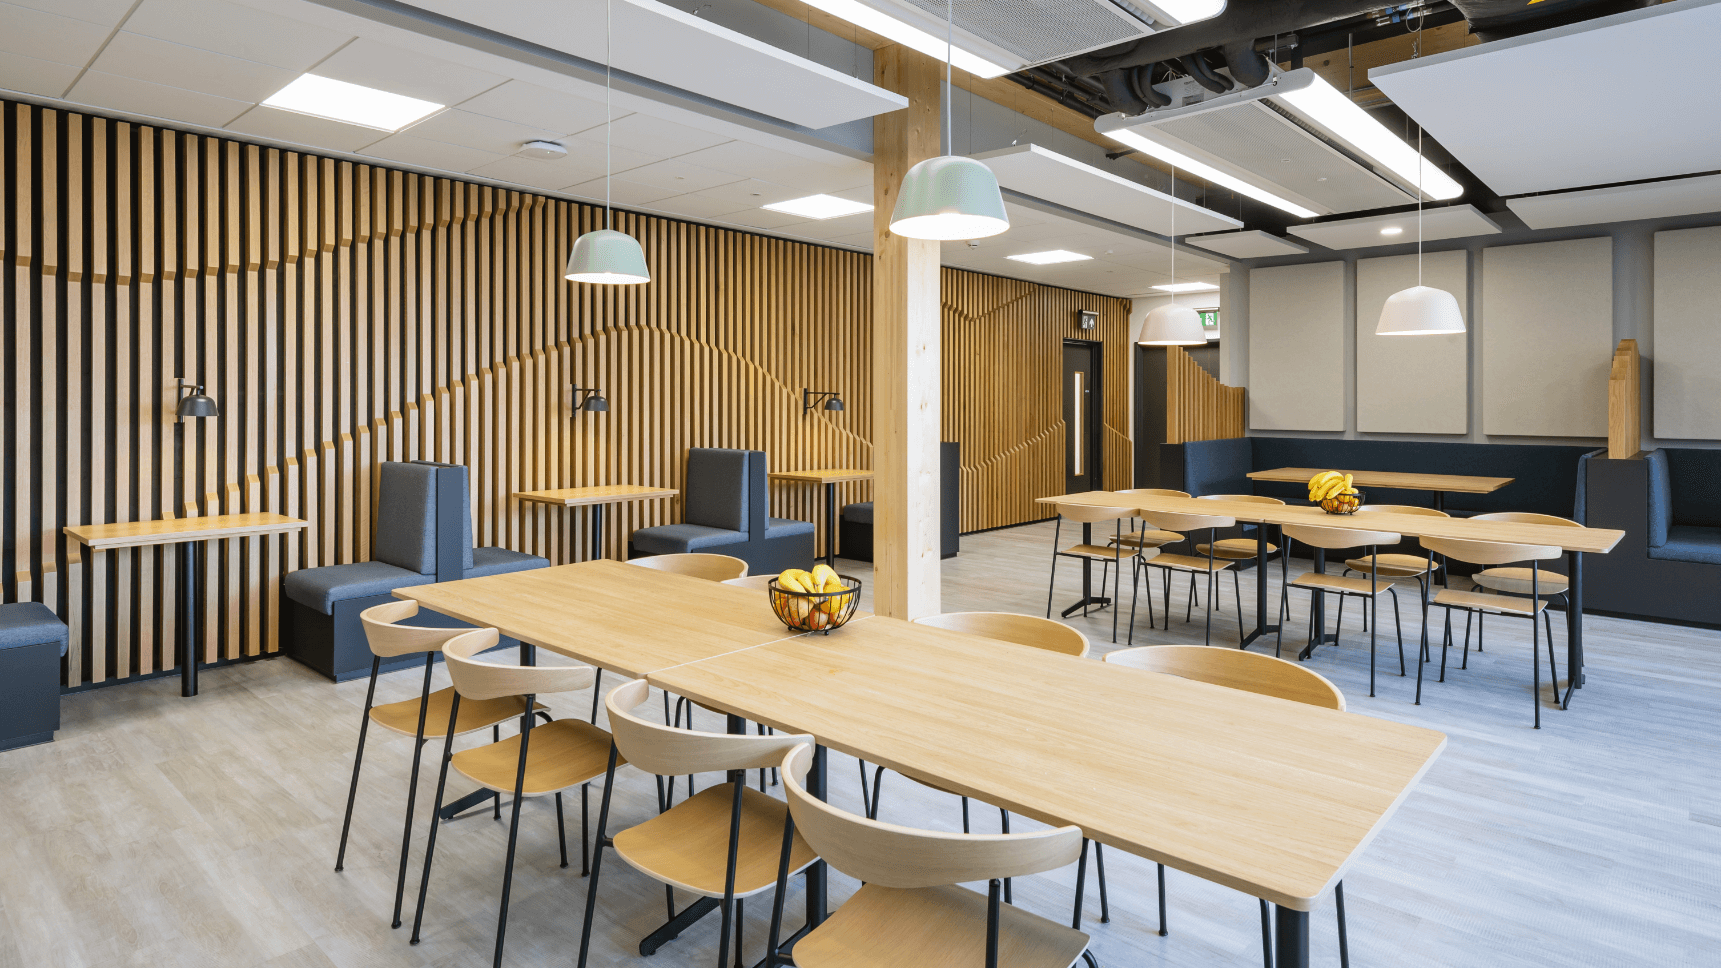 Dogger Bank modern working area with long tables in an open space